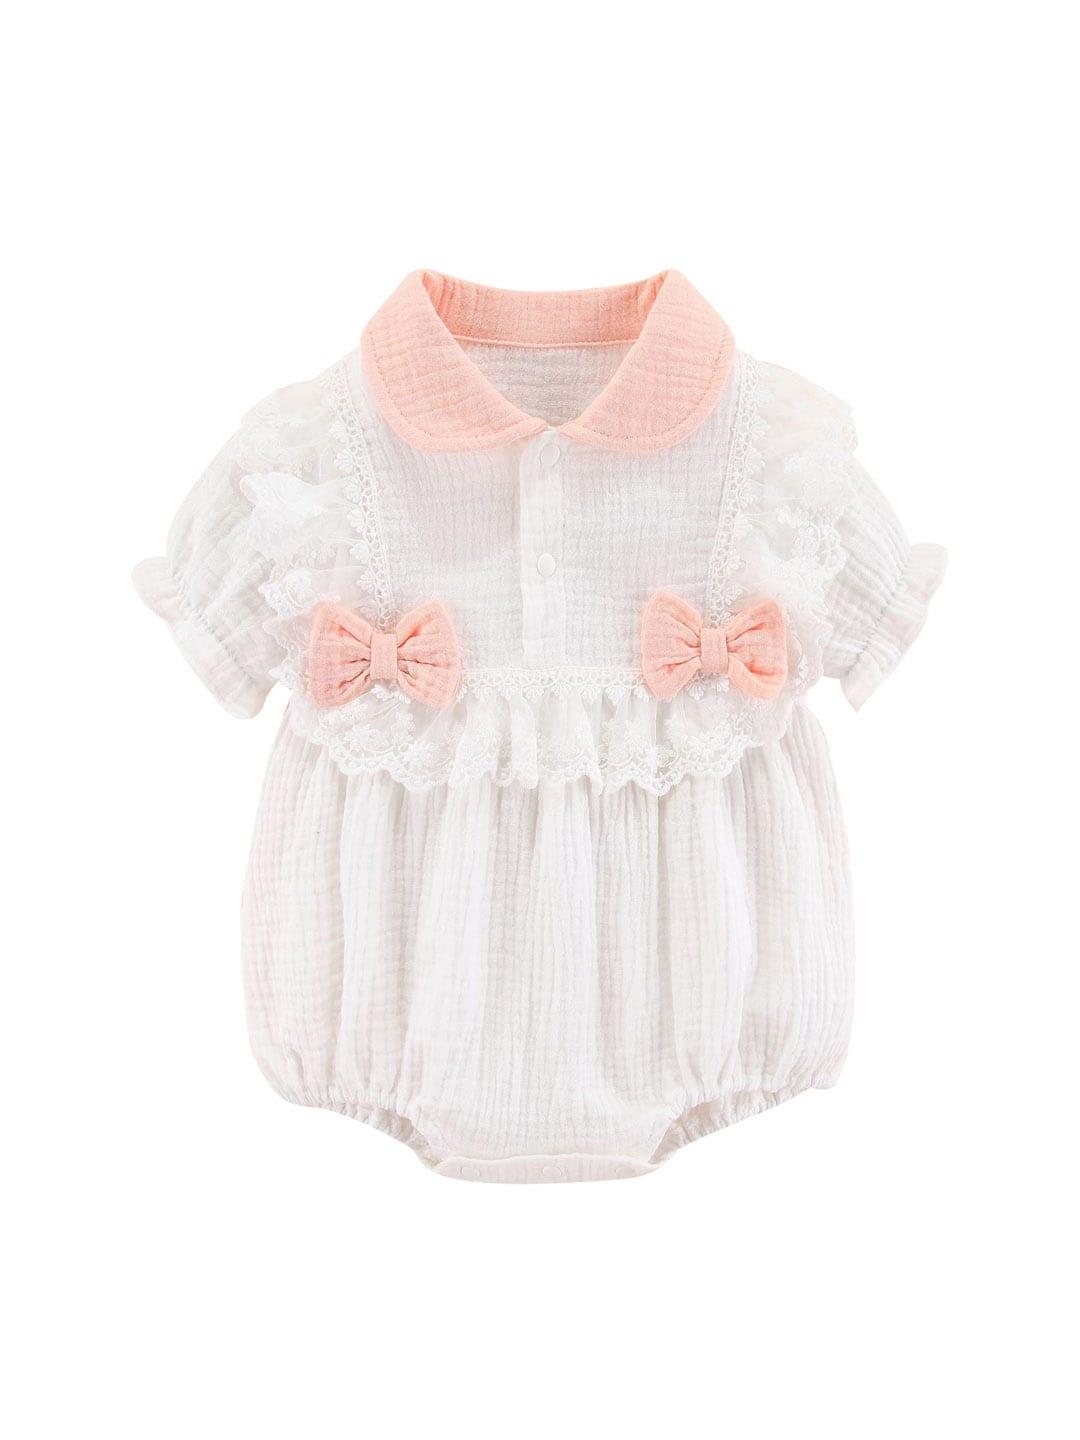 StyleCast Infant Girls Cotton Rompers